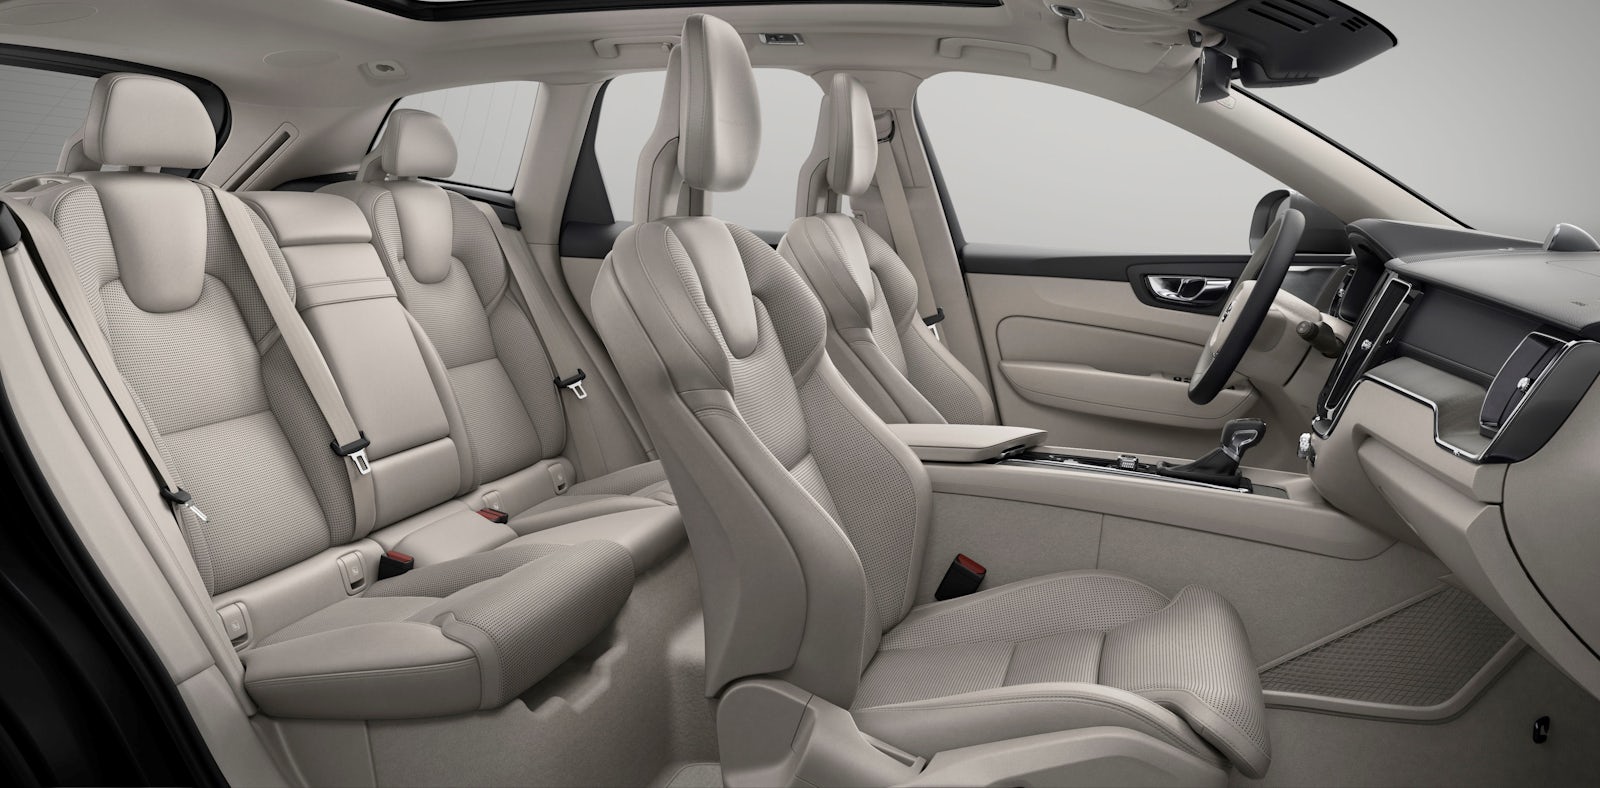 Volvo XC60 Boot Space & Dimensions carwow